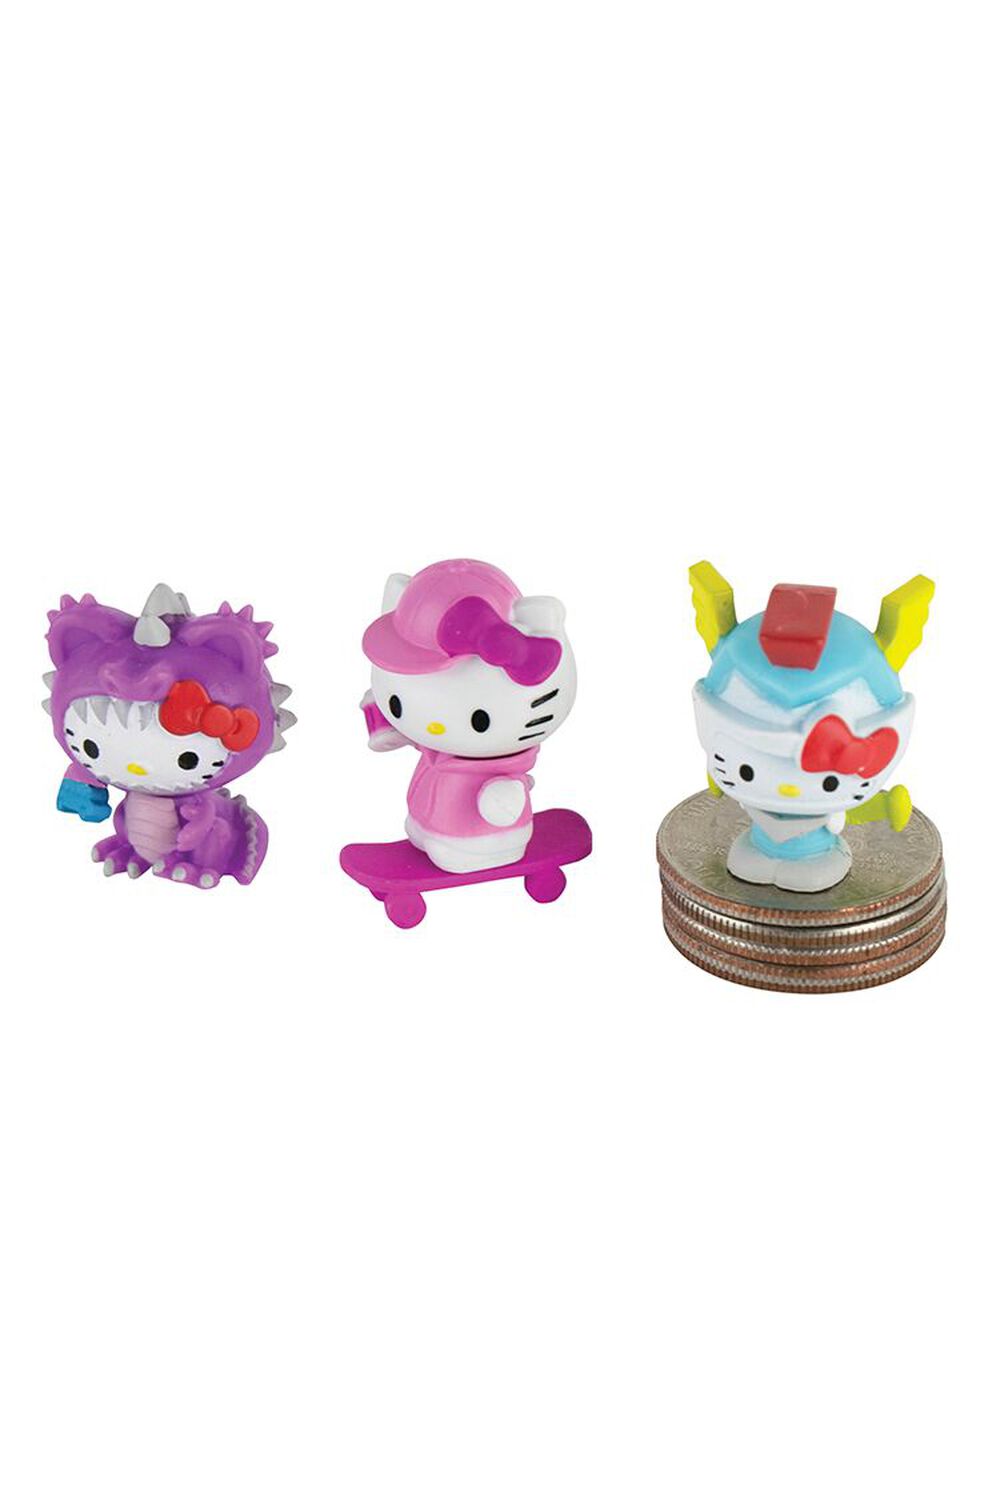 Real Littles Collectible Micro Sanrio Hello Kitty and Friends